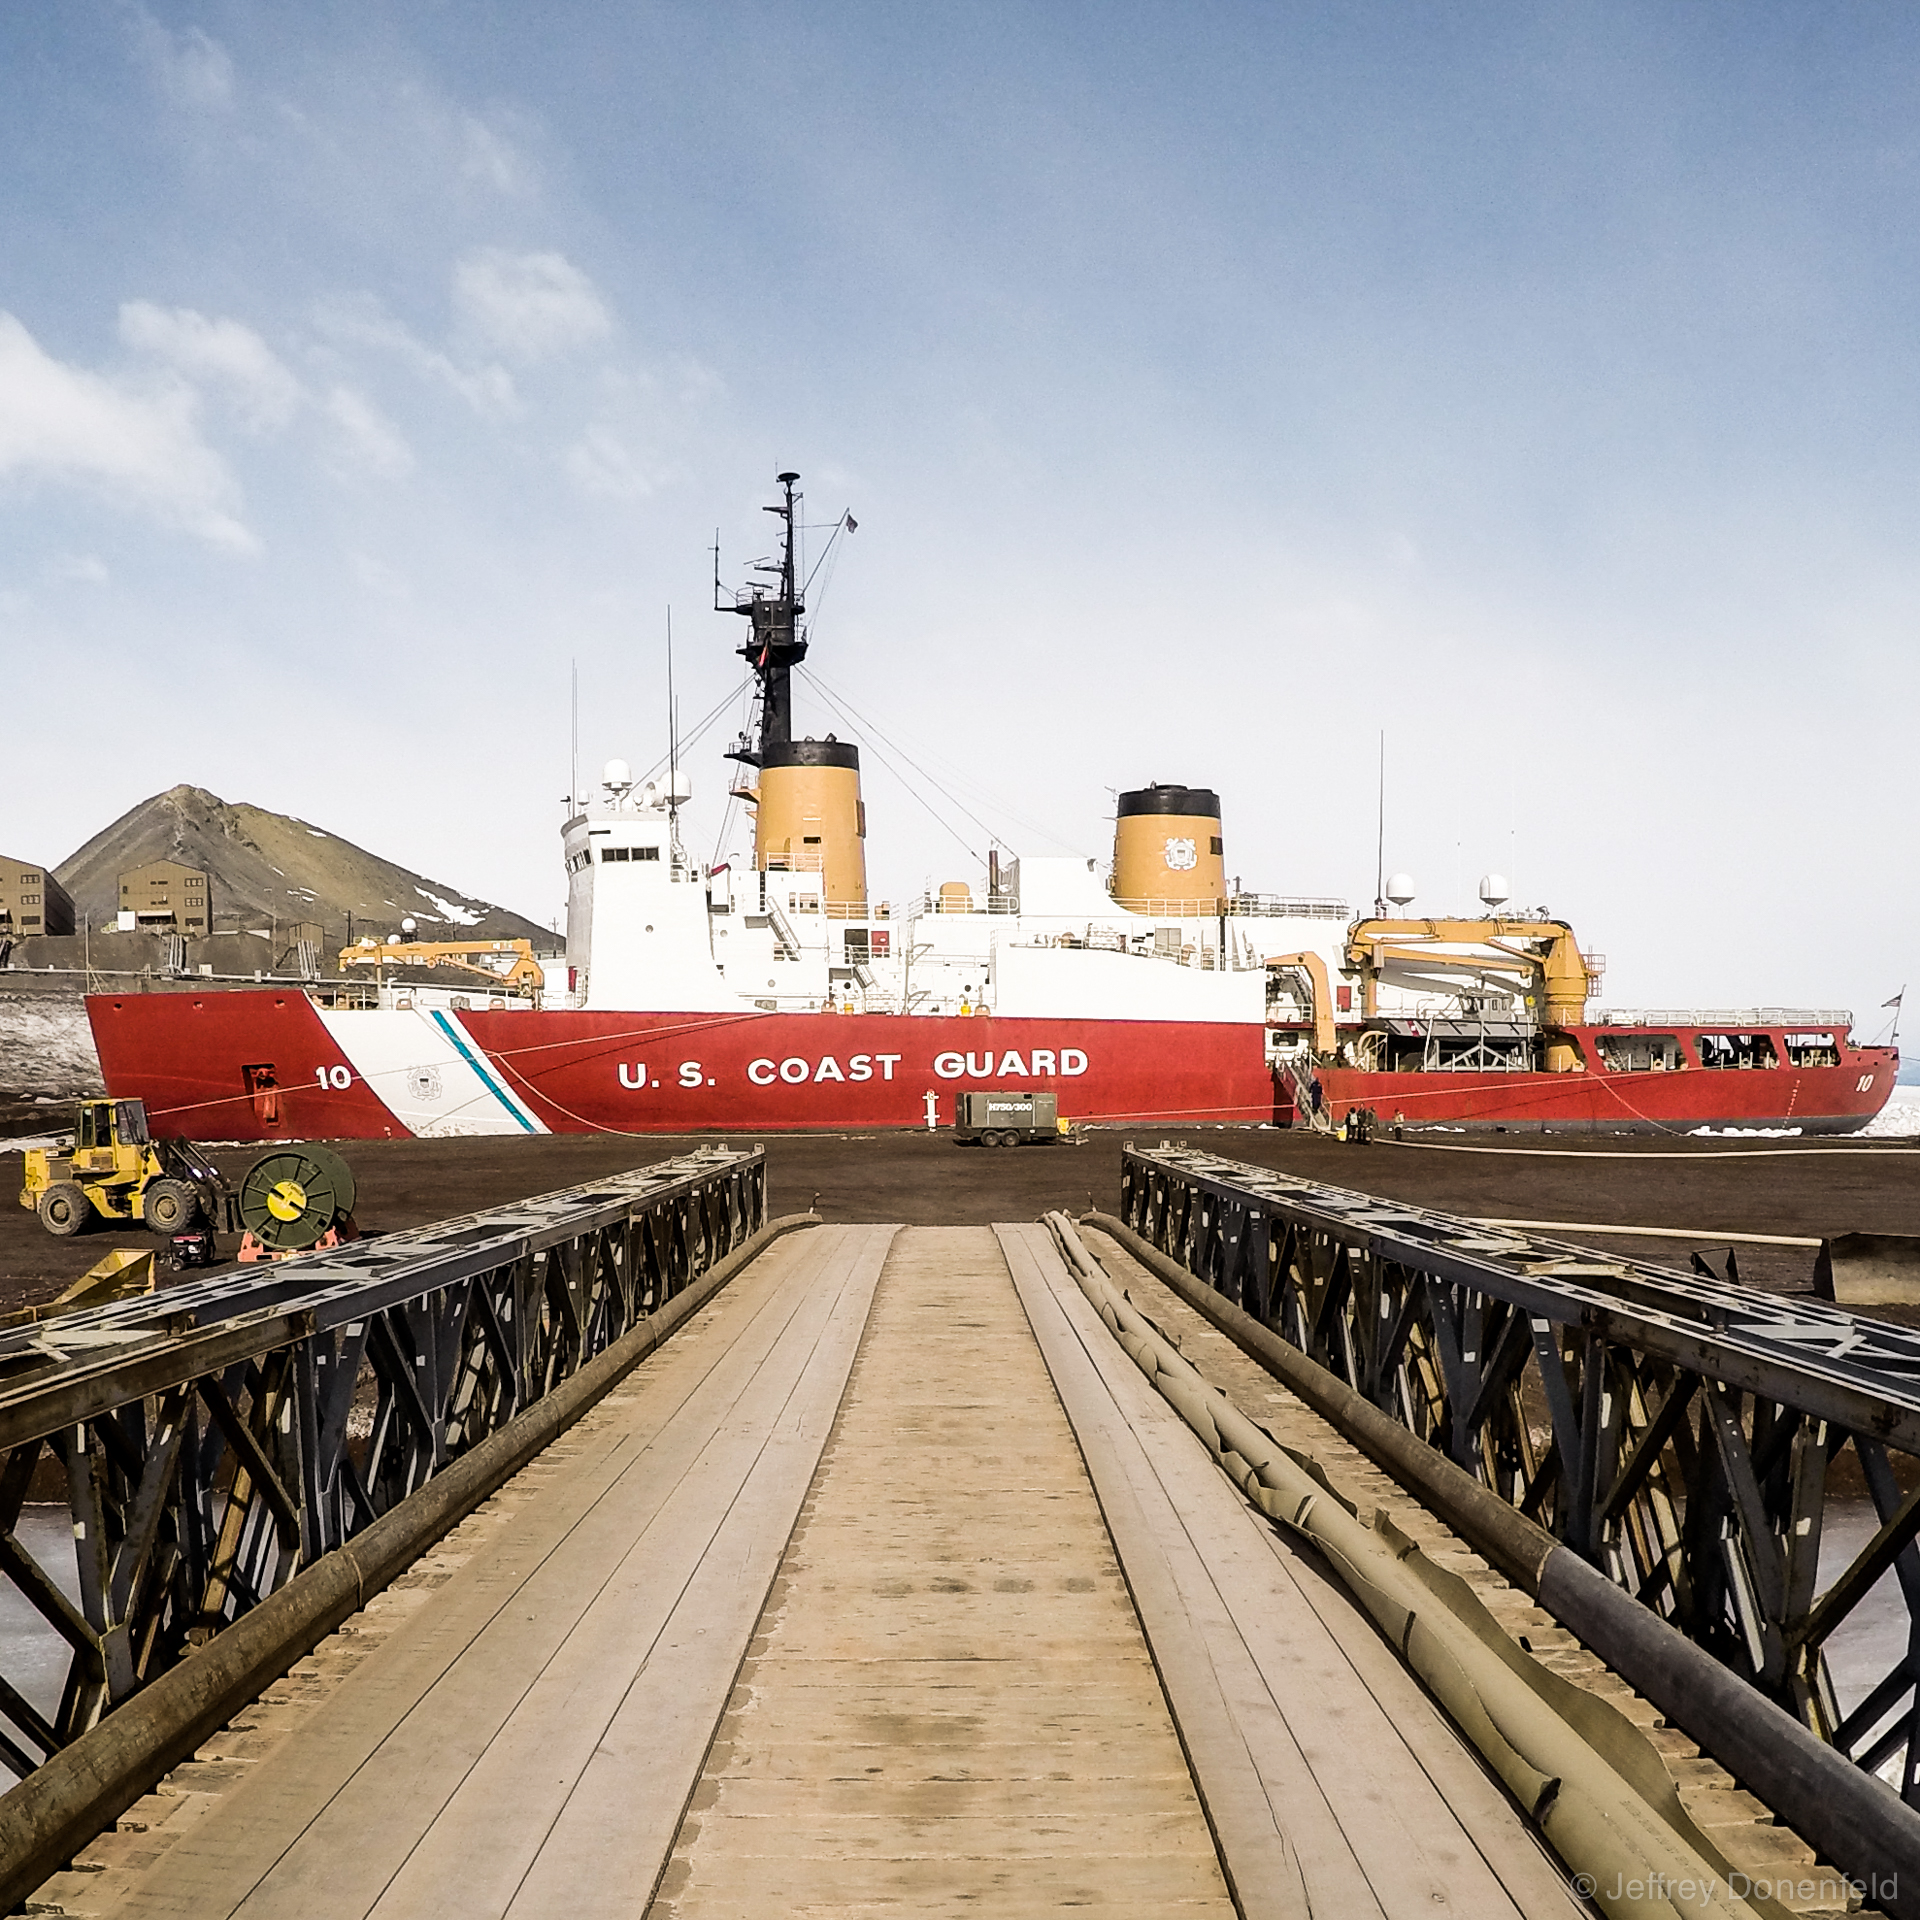 Exploring the World’s Most Powerful Icebreaker – The Jet Engine-Powered US Coast Guard Cutter “Polar Star”